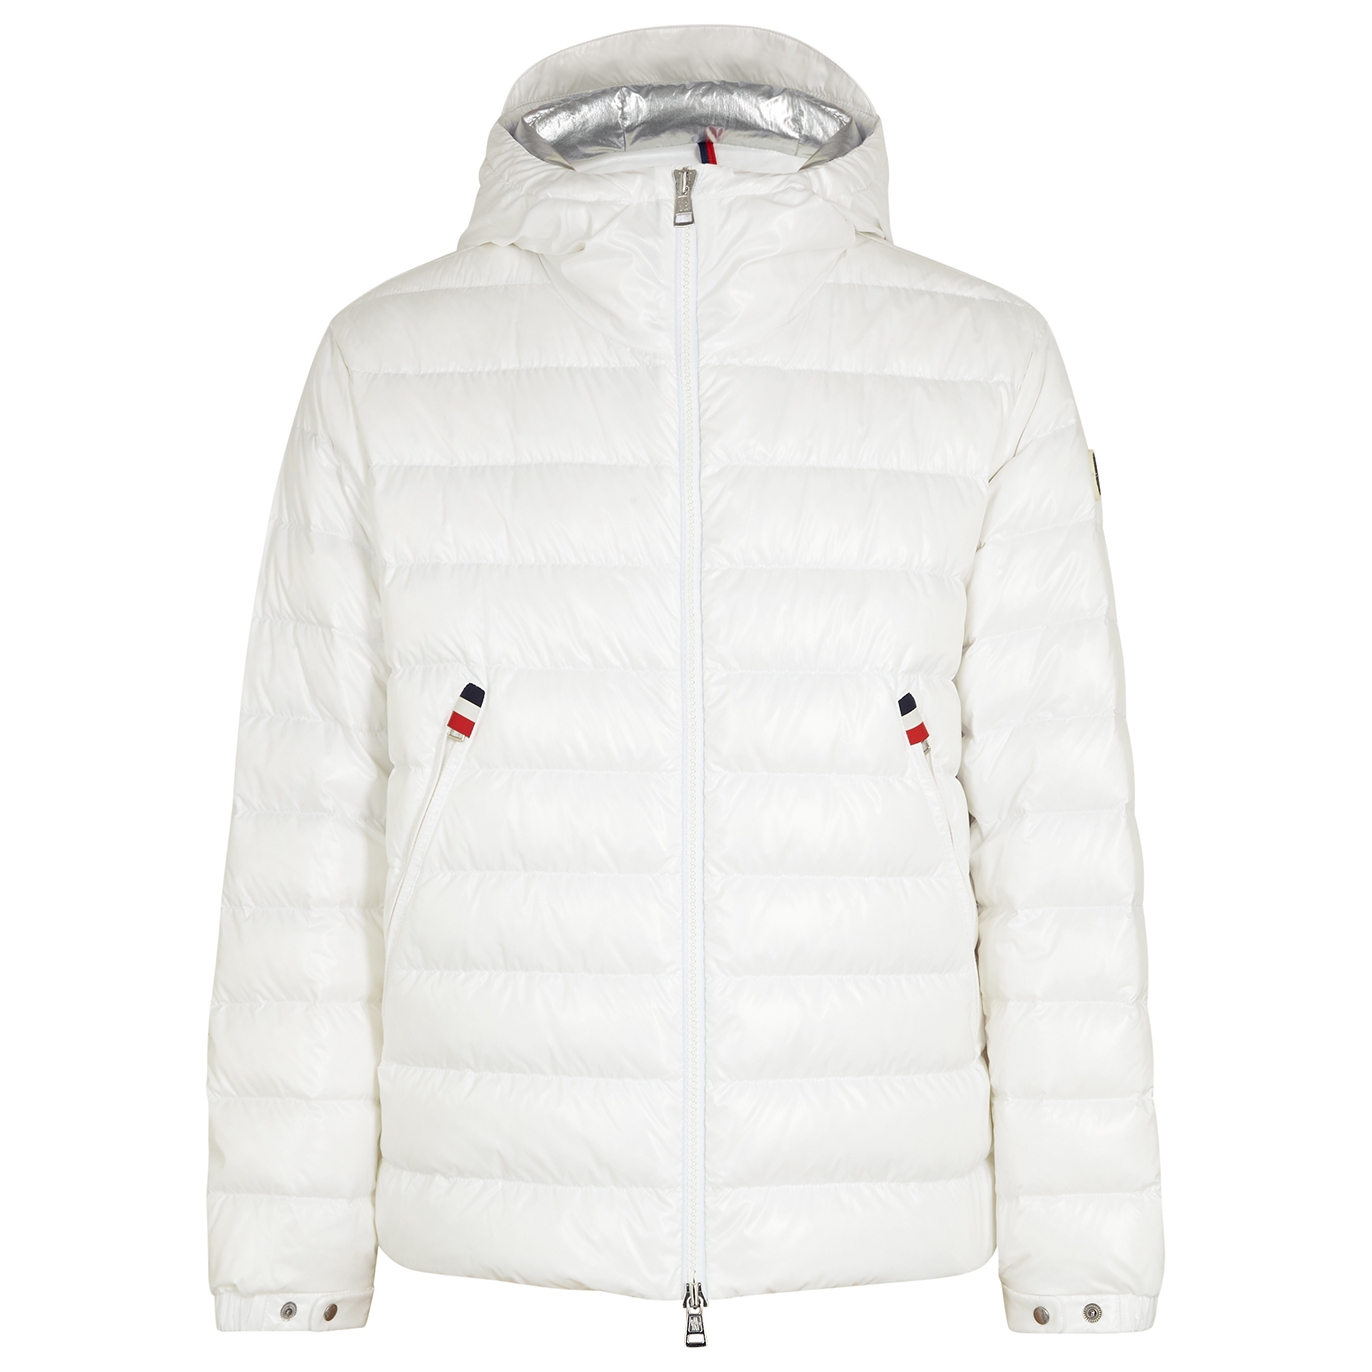 Moncler Blesle White Quilted Shell Jacket, Jacket, White, Quilted